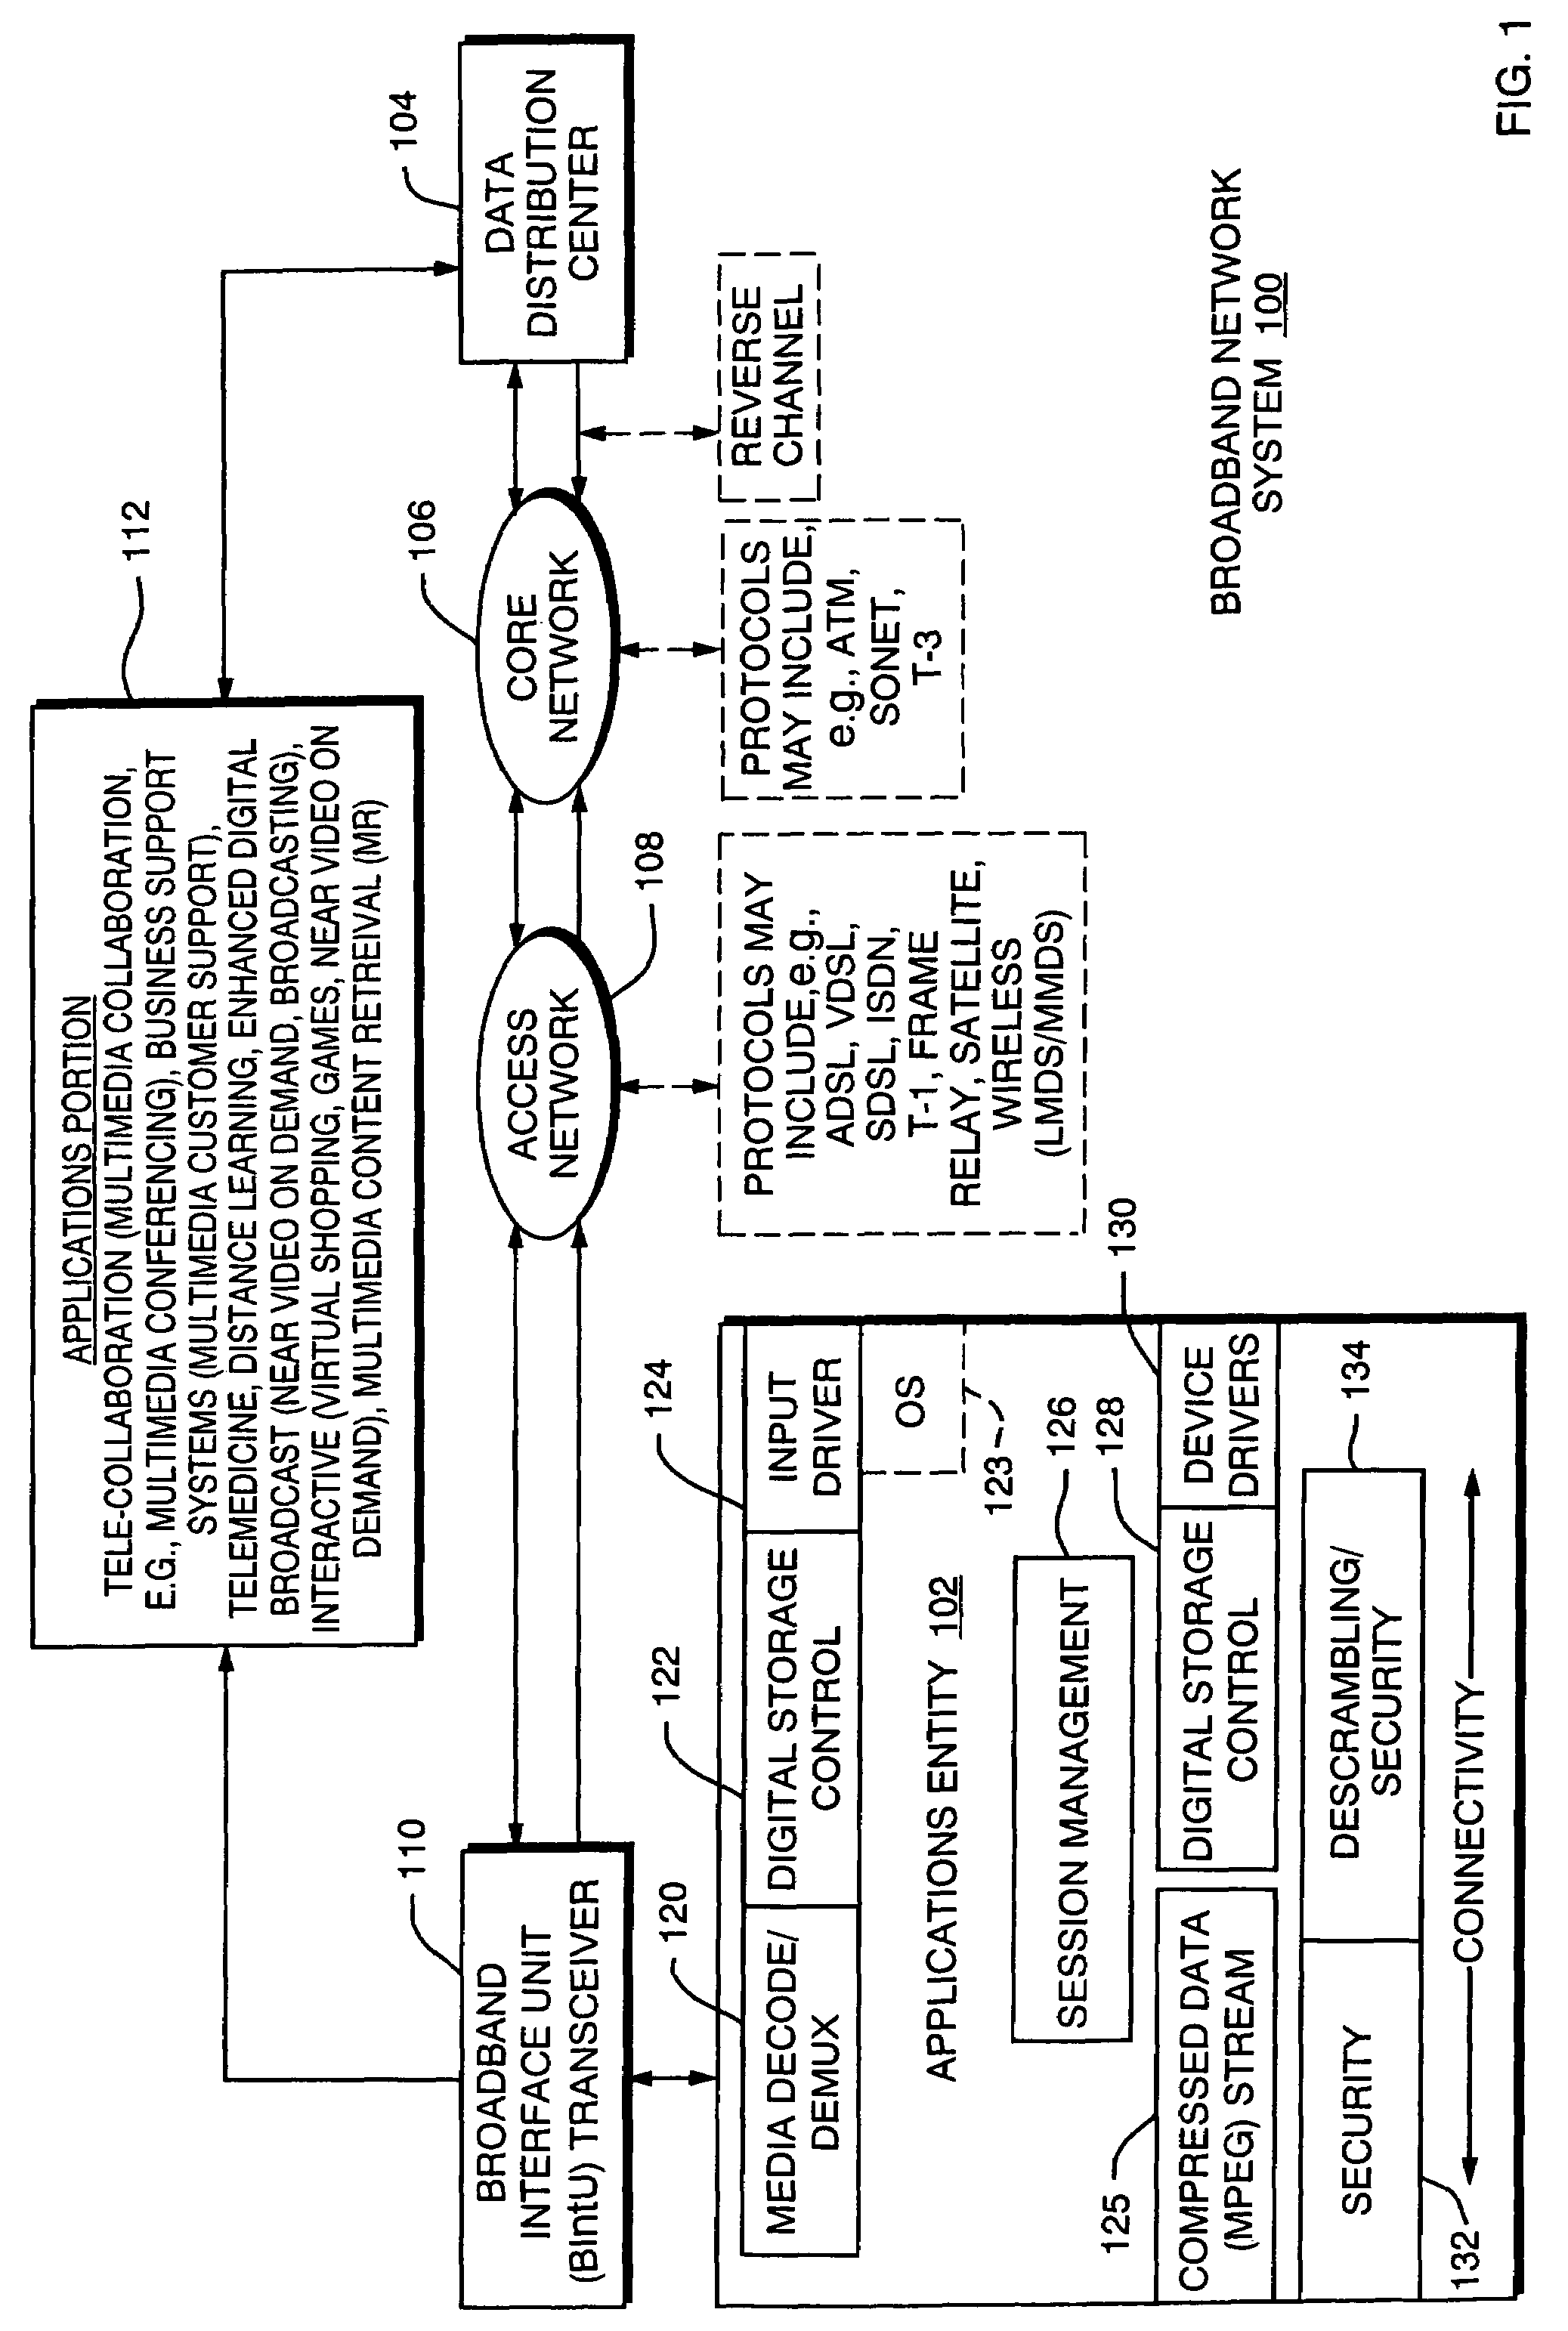 Broadband network system configured to transport audio or video at the transport layer, and associated method